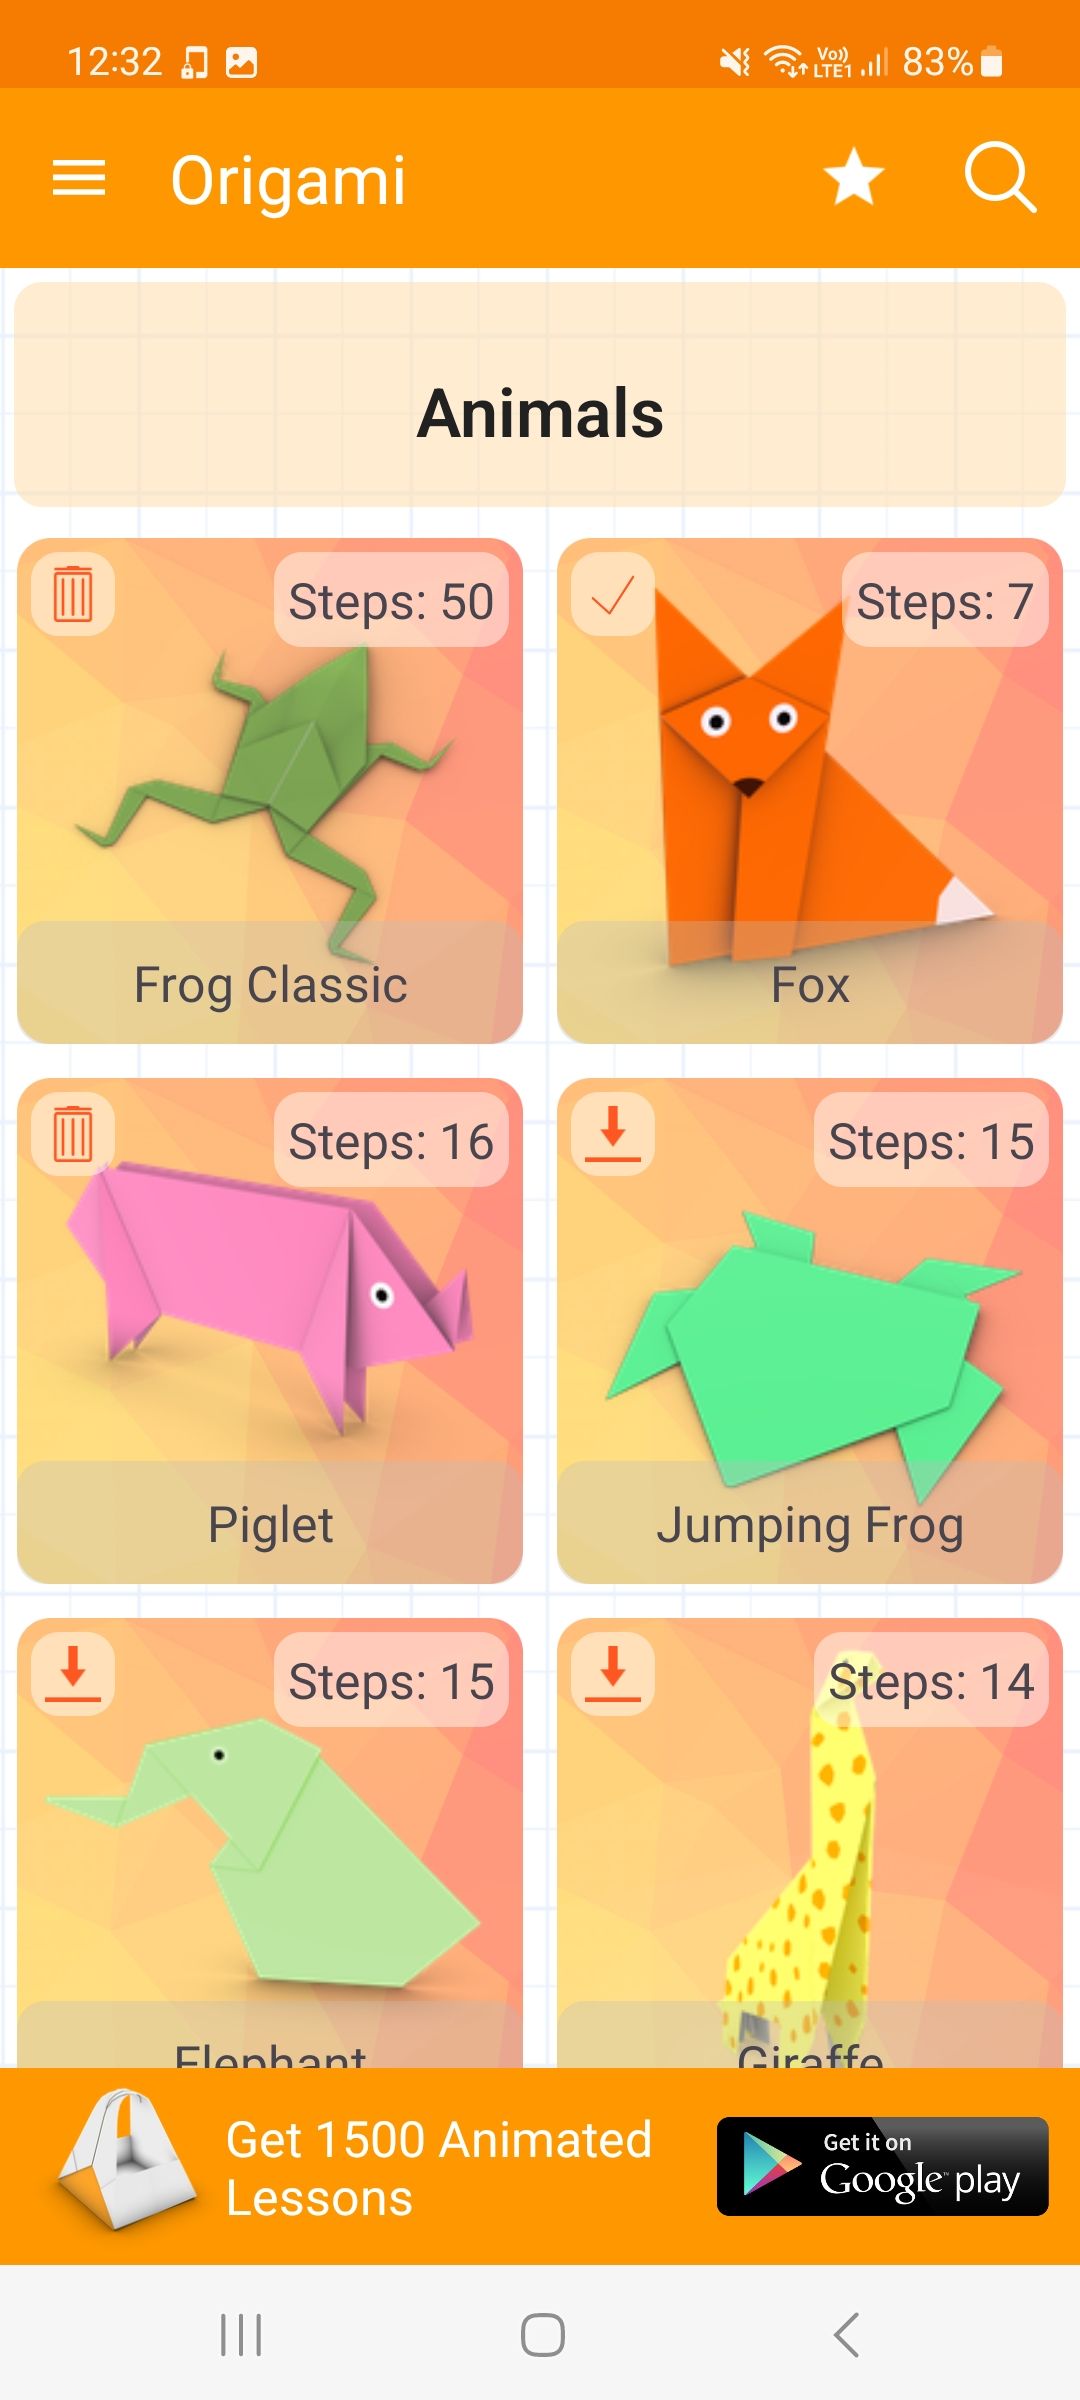 animals in How to Make Orgiami app